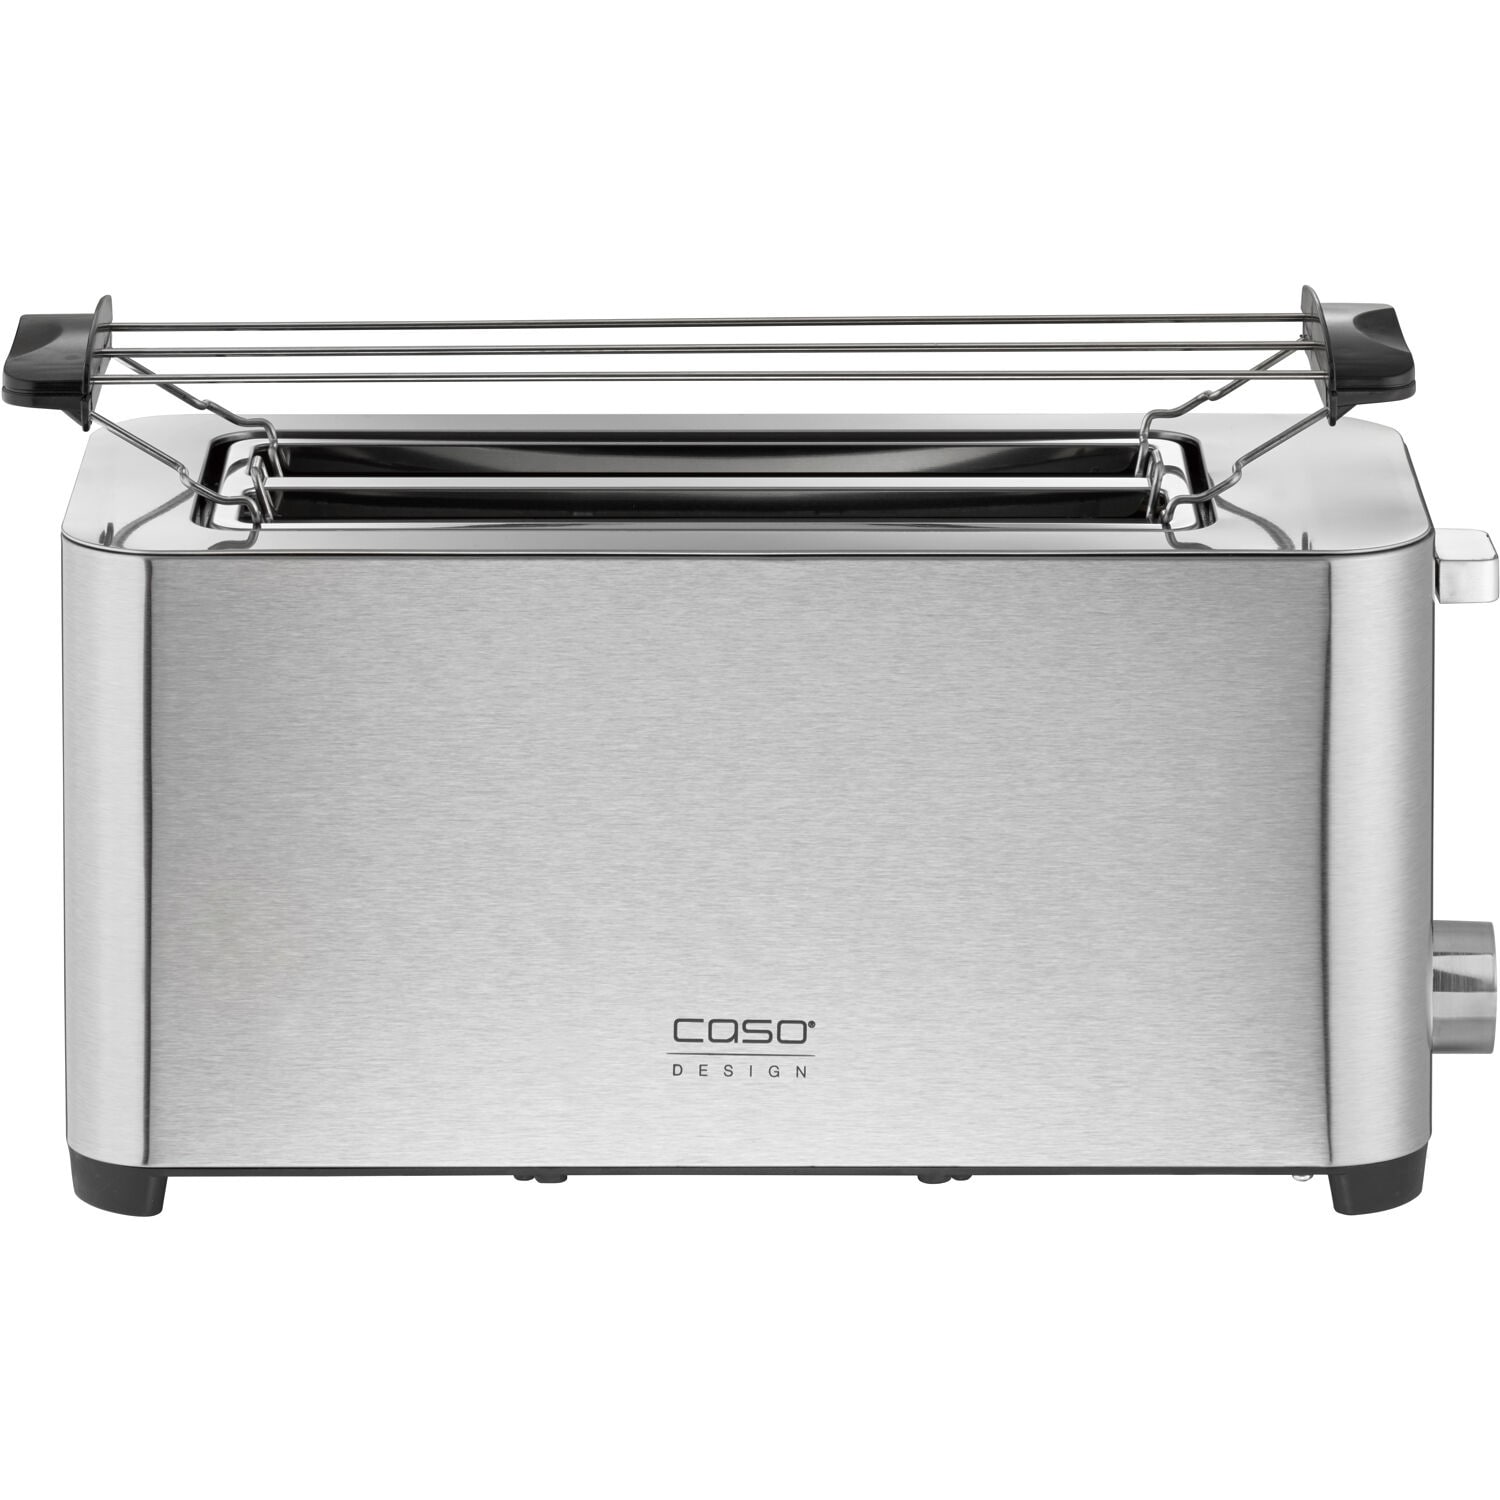 https://ak1.ostkcdn.com/images/products/is/images/direct/c54b9563afe17f7d40411970f6d67aeced0bb4d3/Four-Slice-Wide-Slot-Toaster%2C-Stainless-Steel.jpg